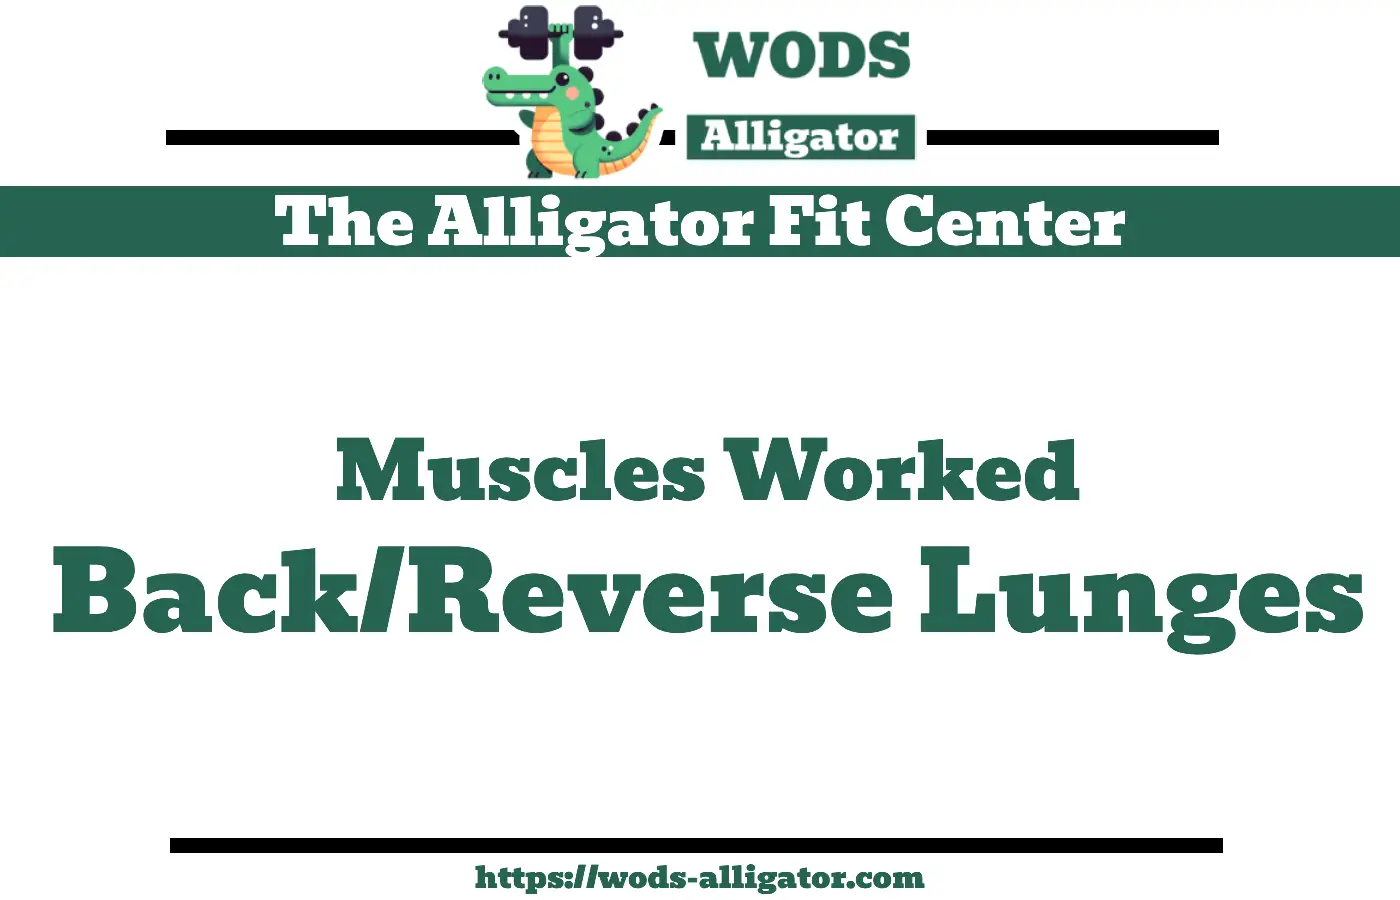 Muscles Worked Back/Reverse Lunges